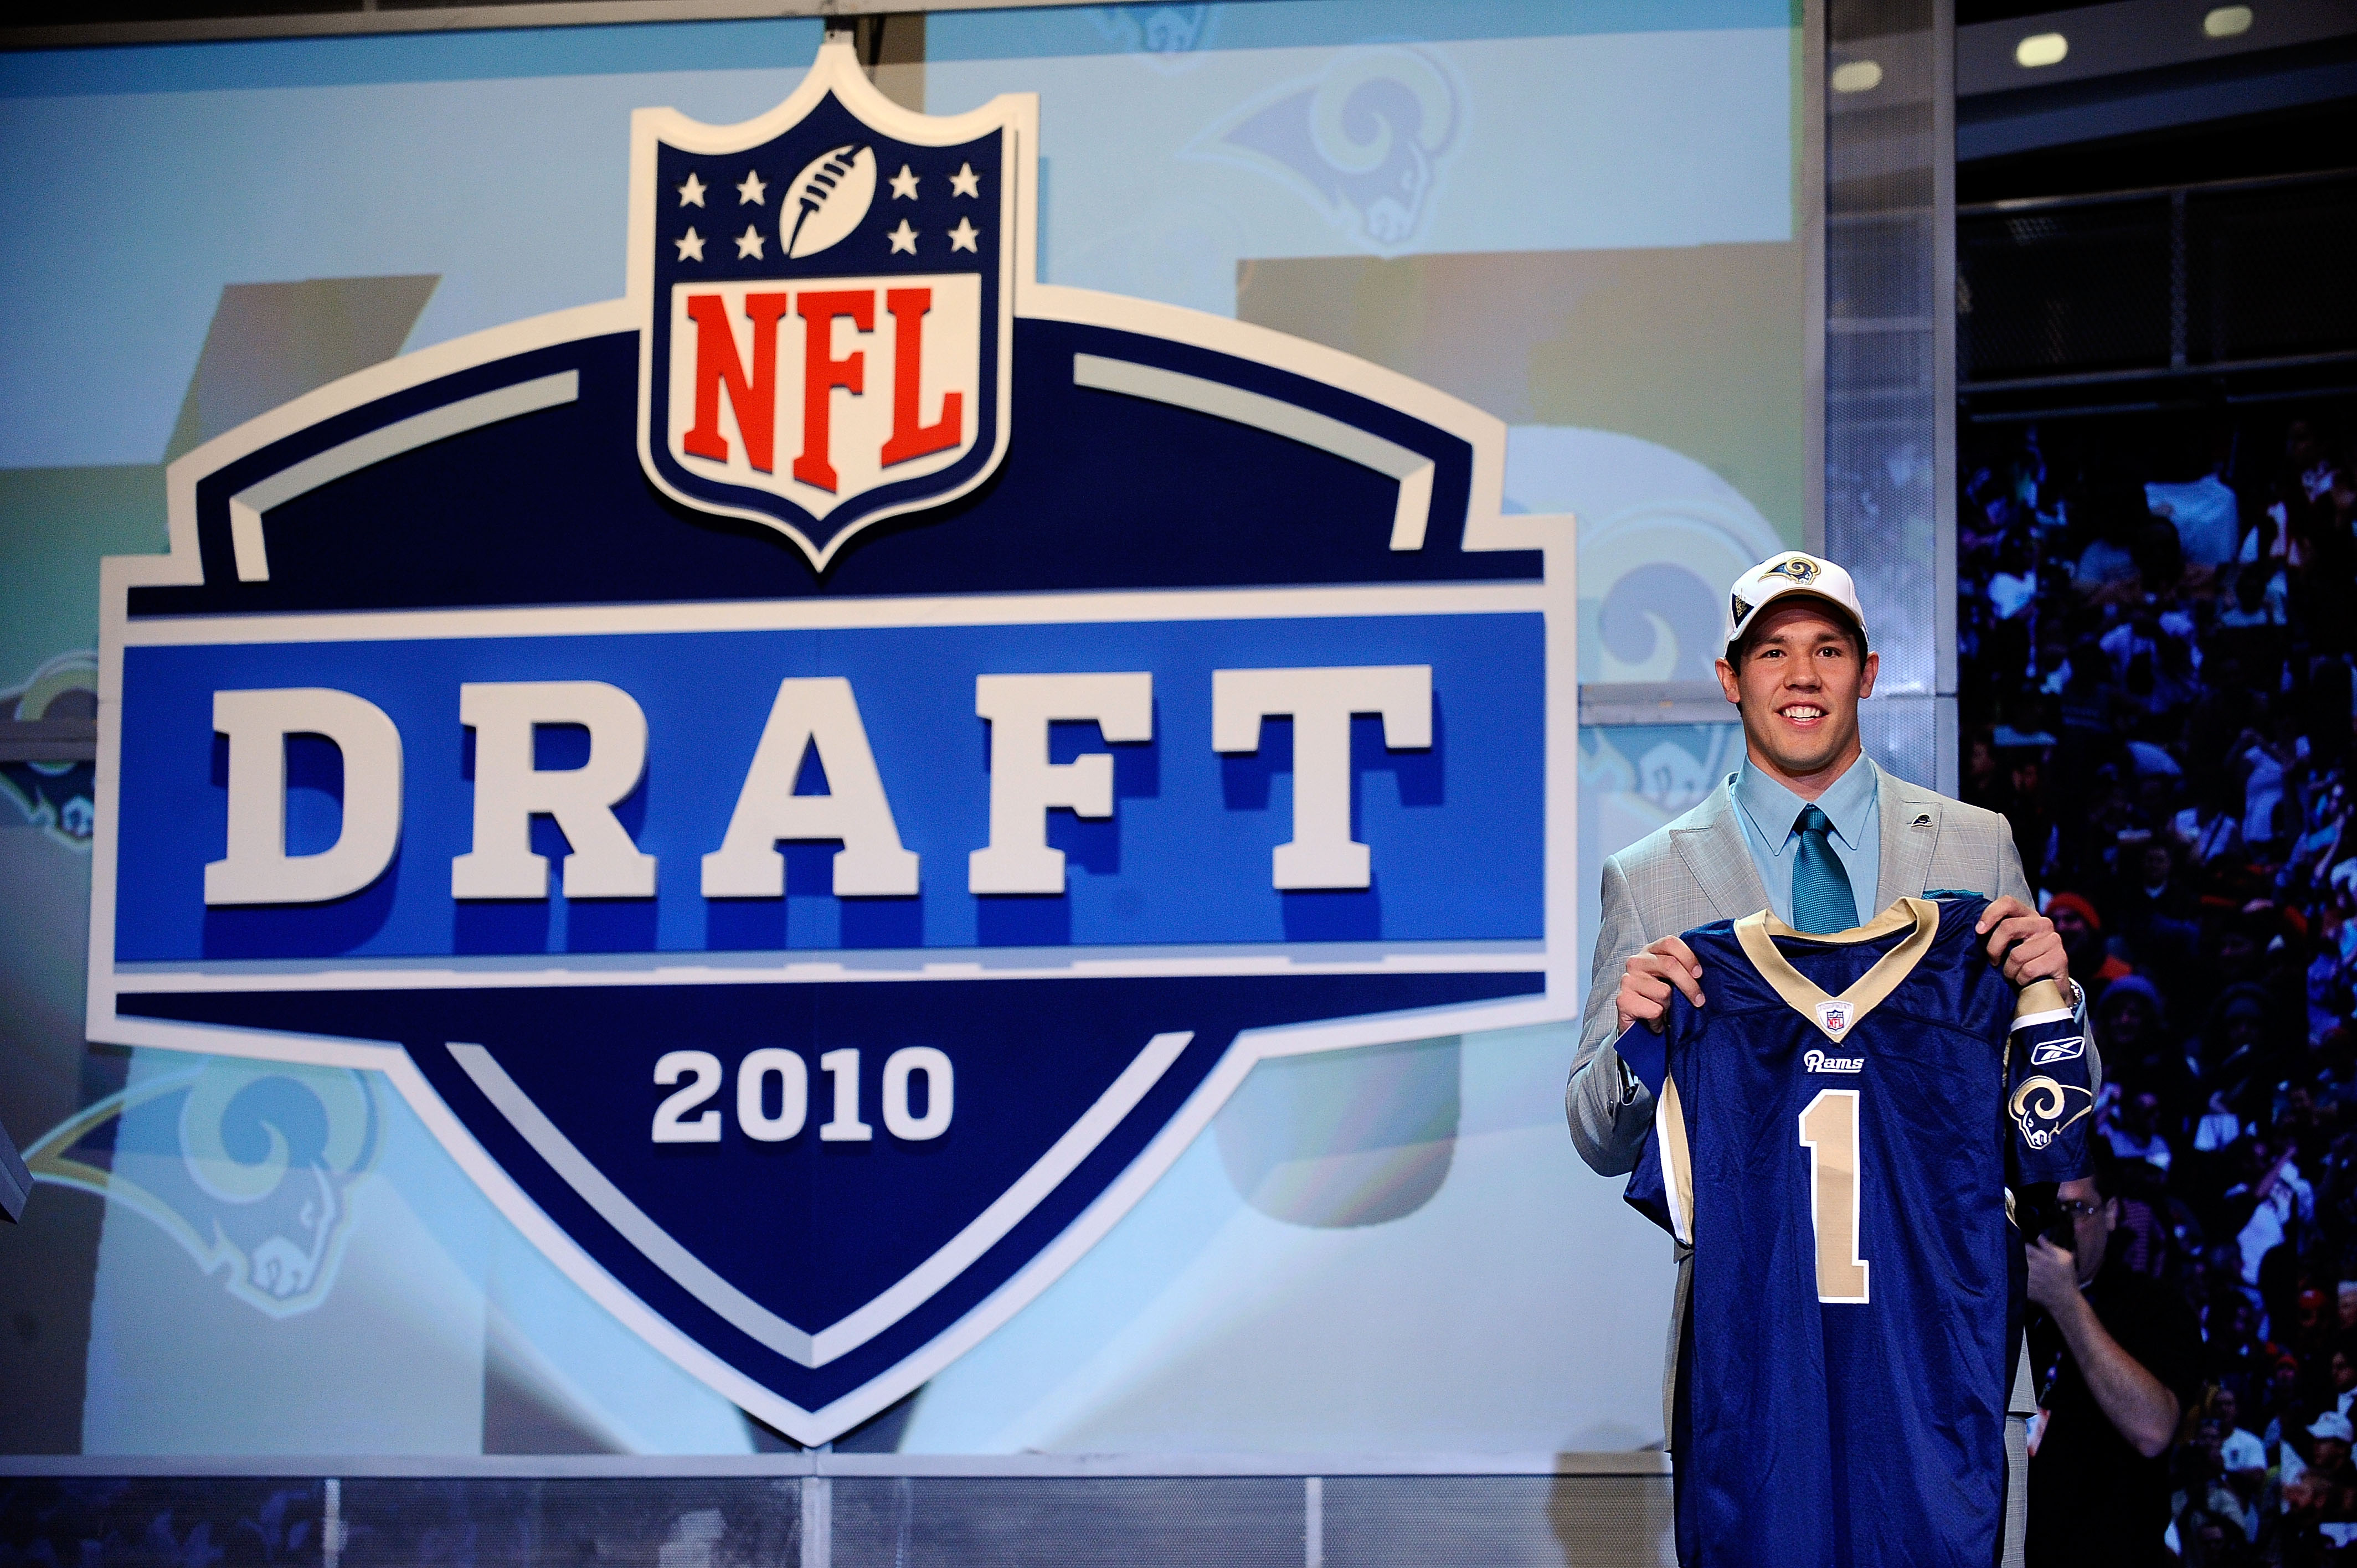 NFL DRAFT 2011:Mad Science or Pure Luck? Full 3-Year Draft Grades